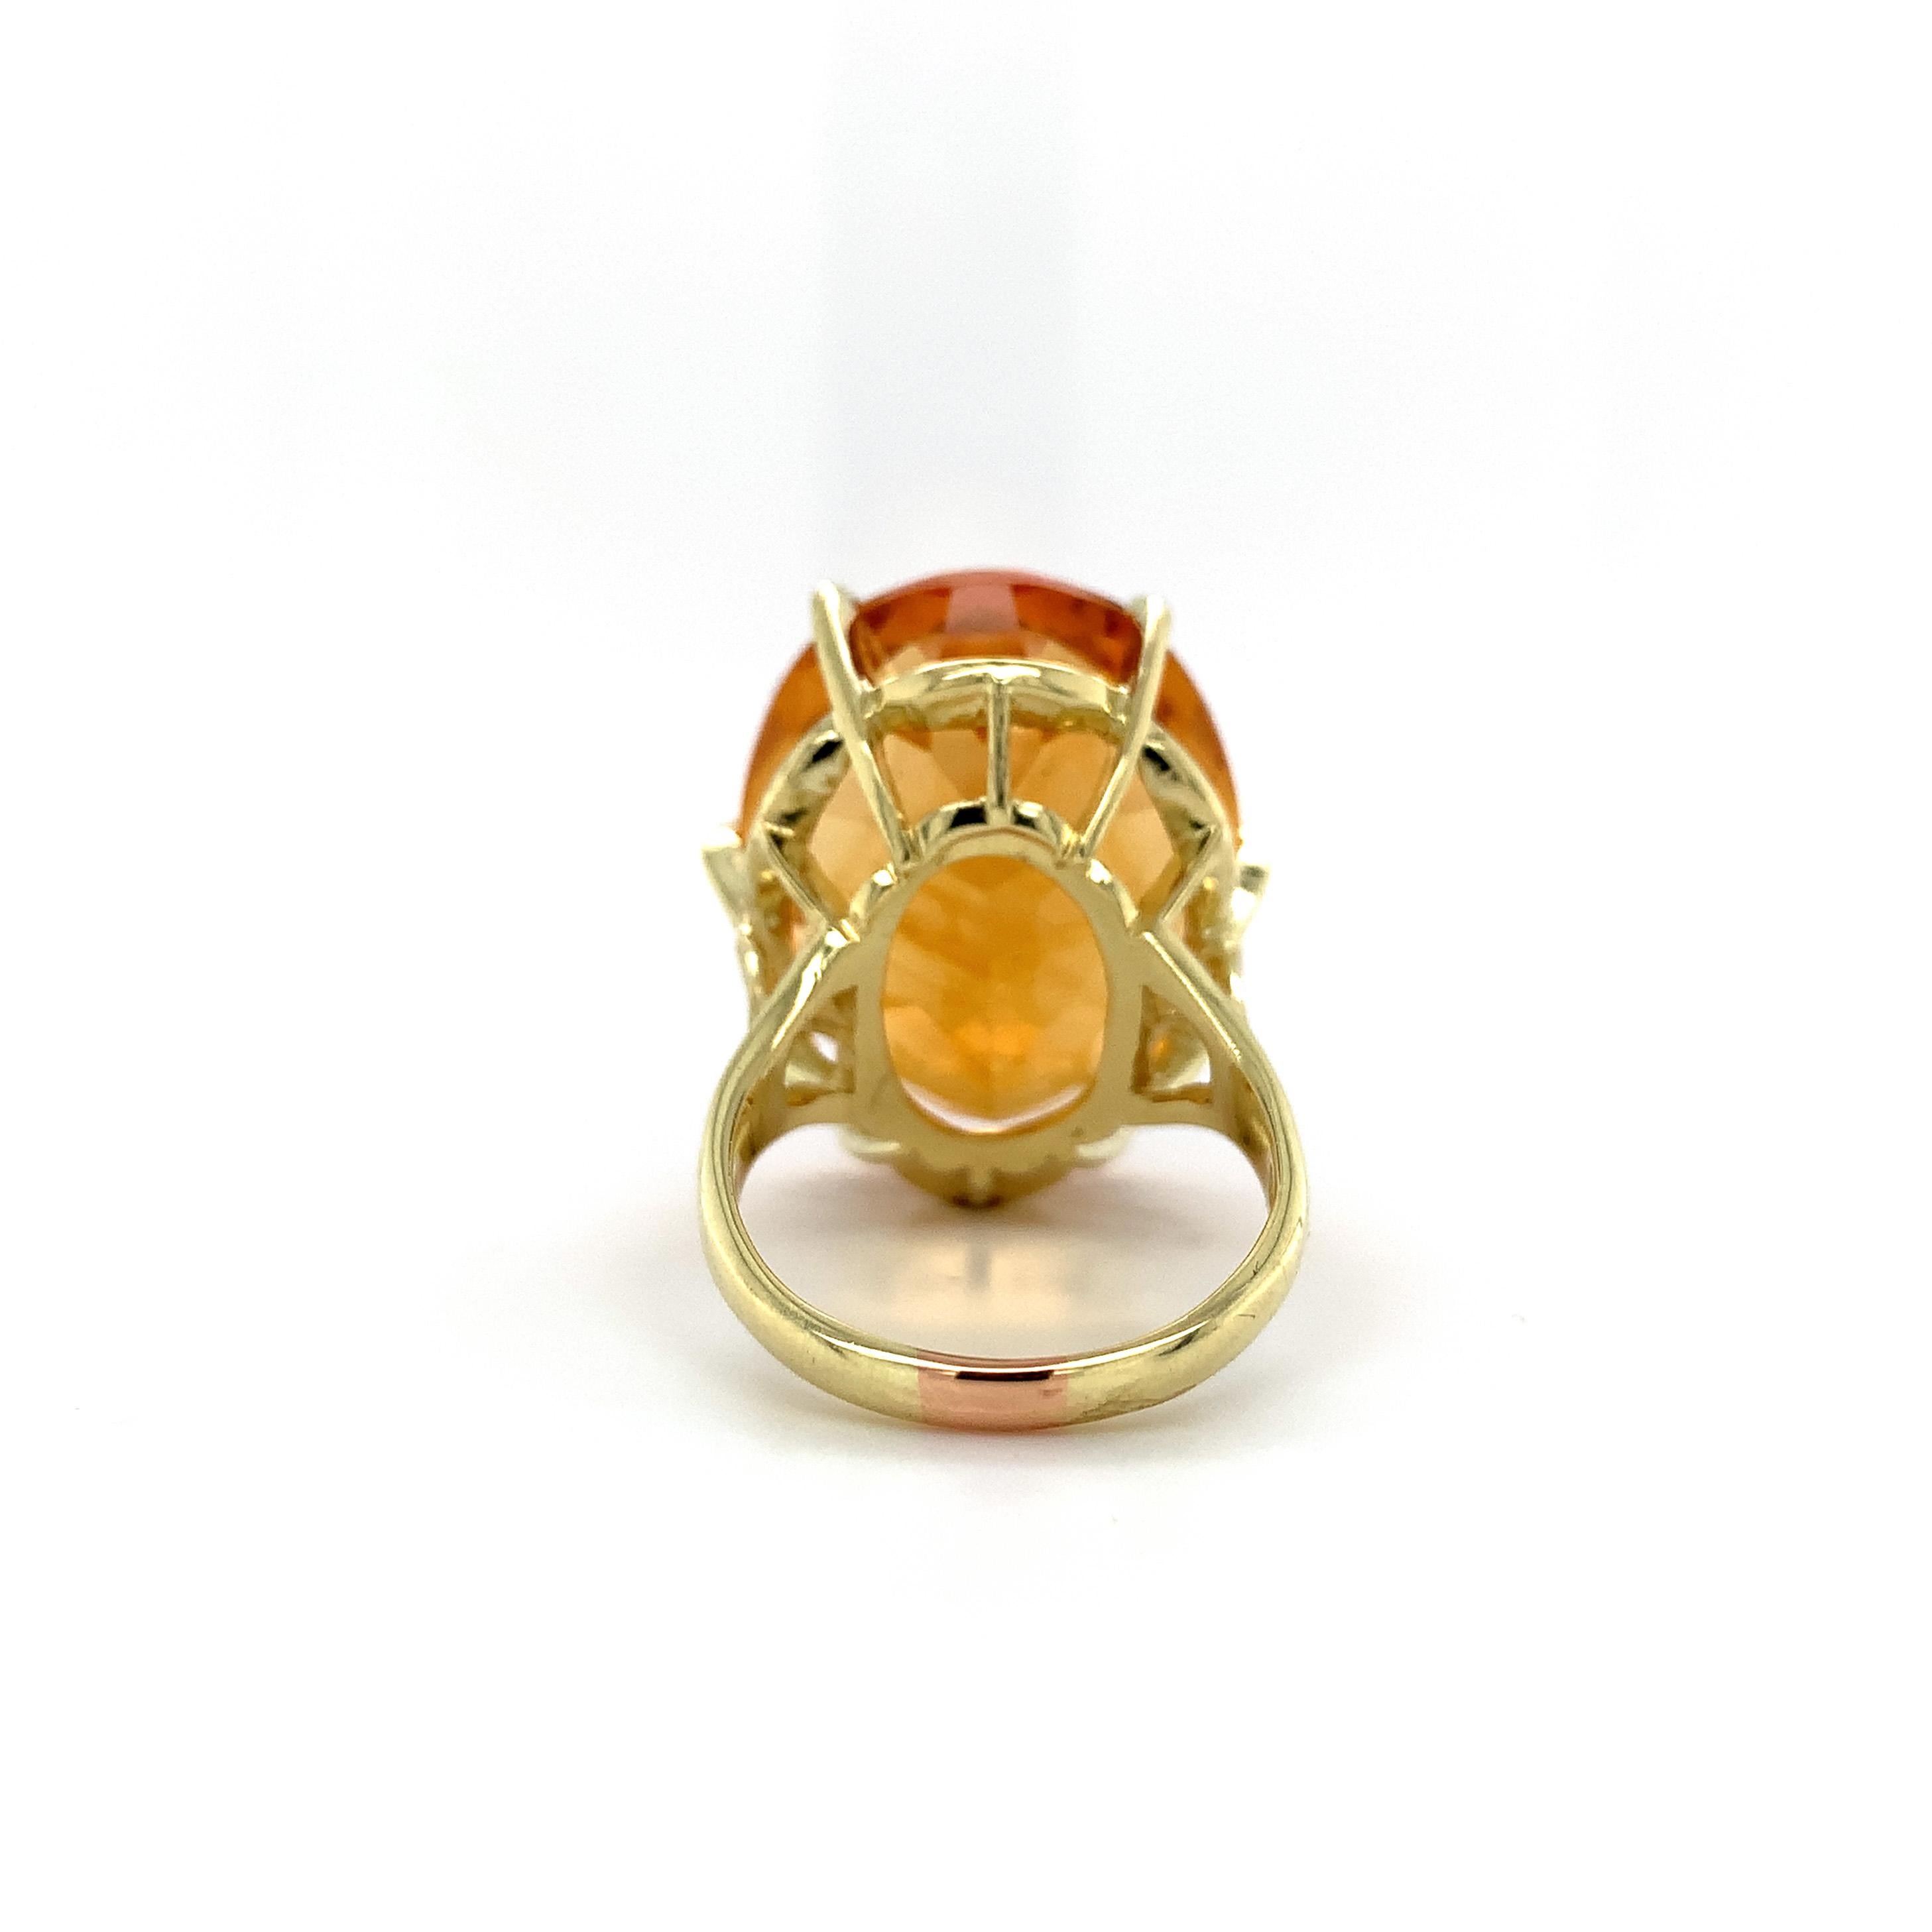 18K yellow gold Ring with a Huge 37 carat Citrine For Sale 1